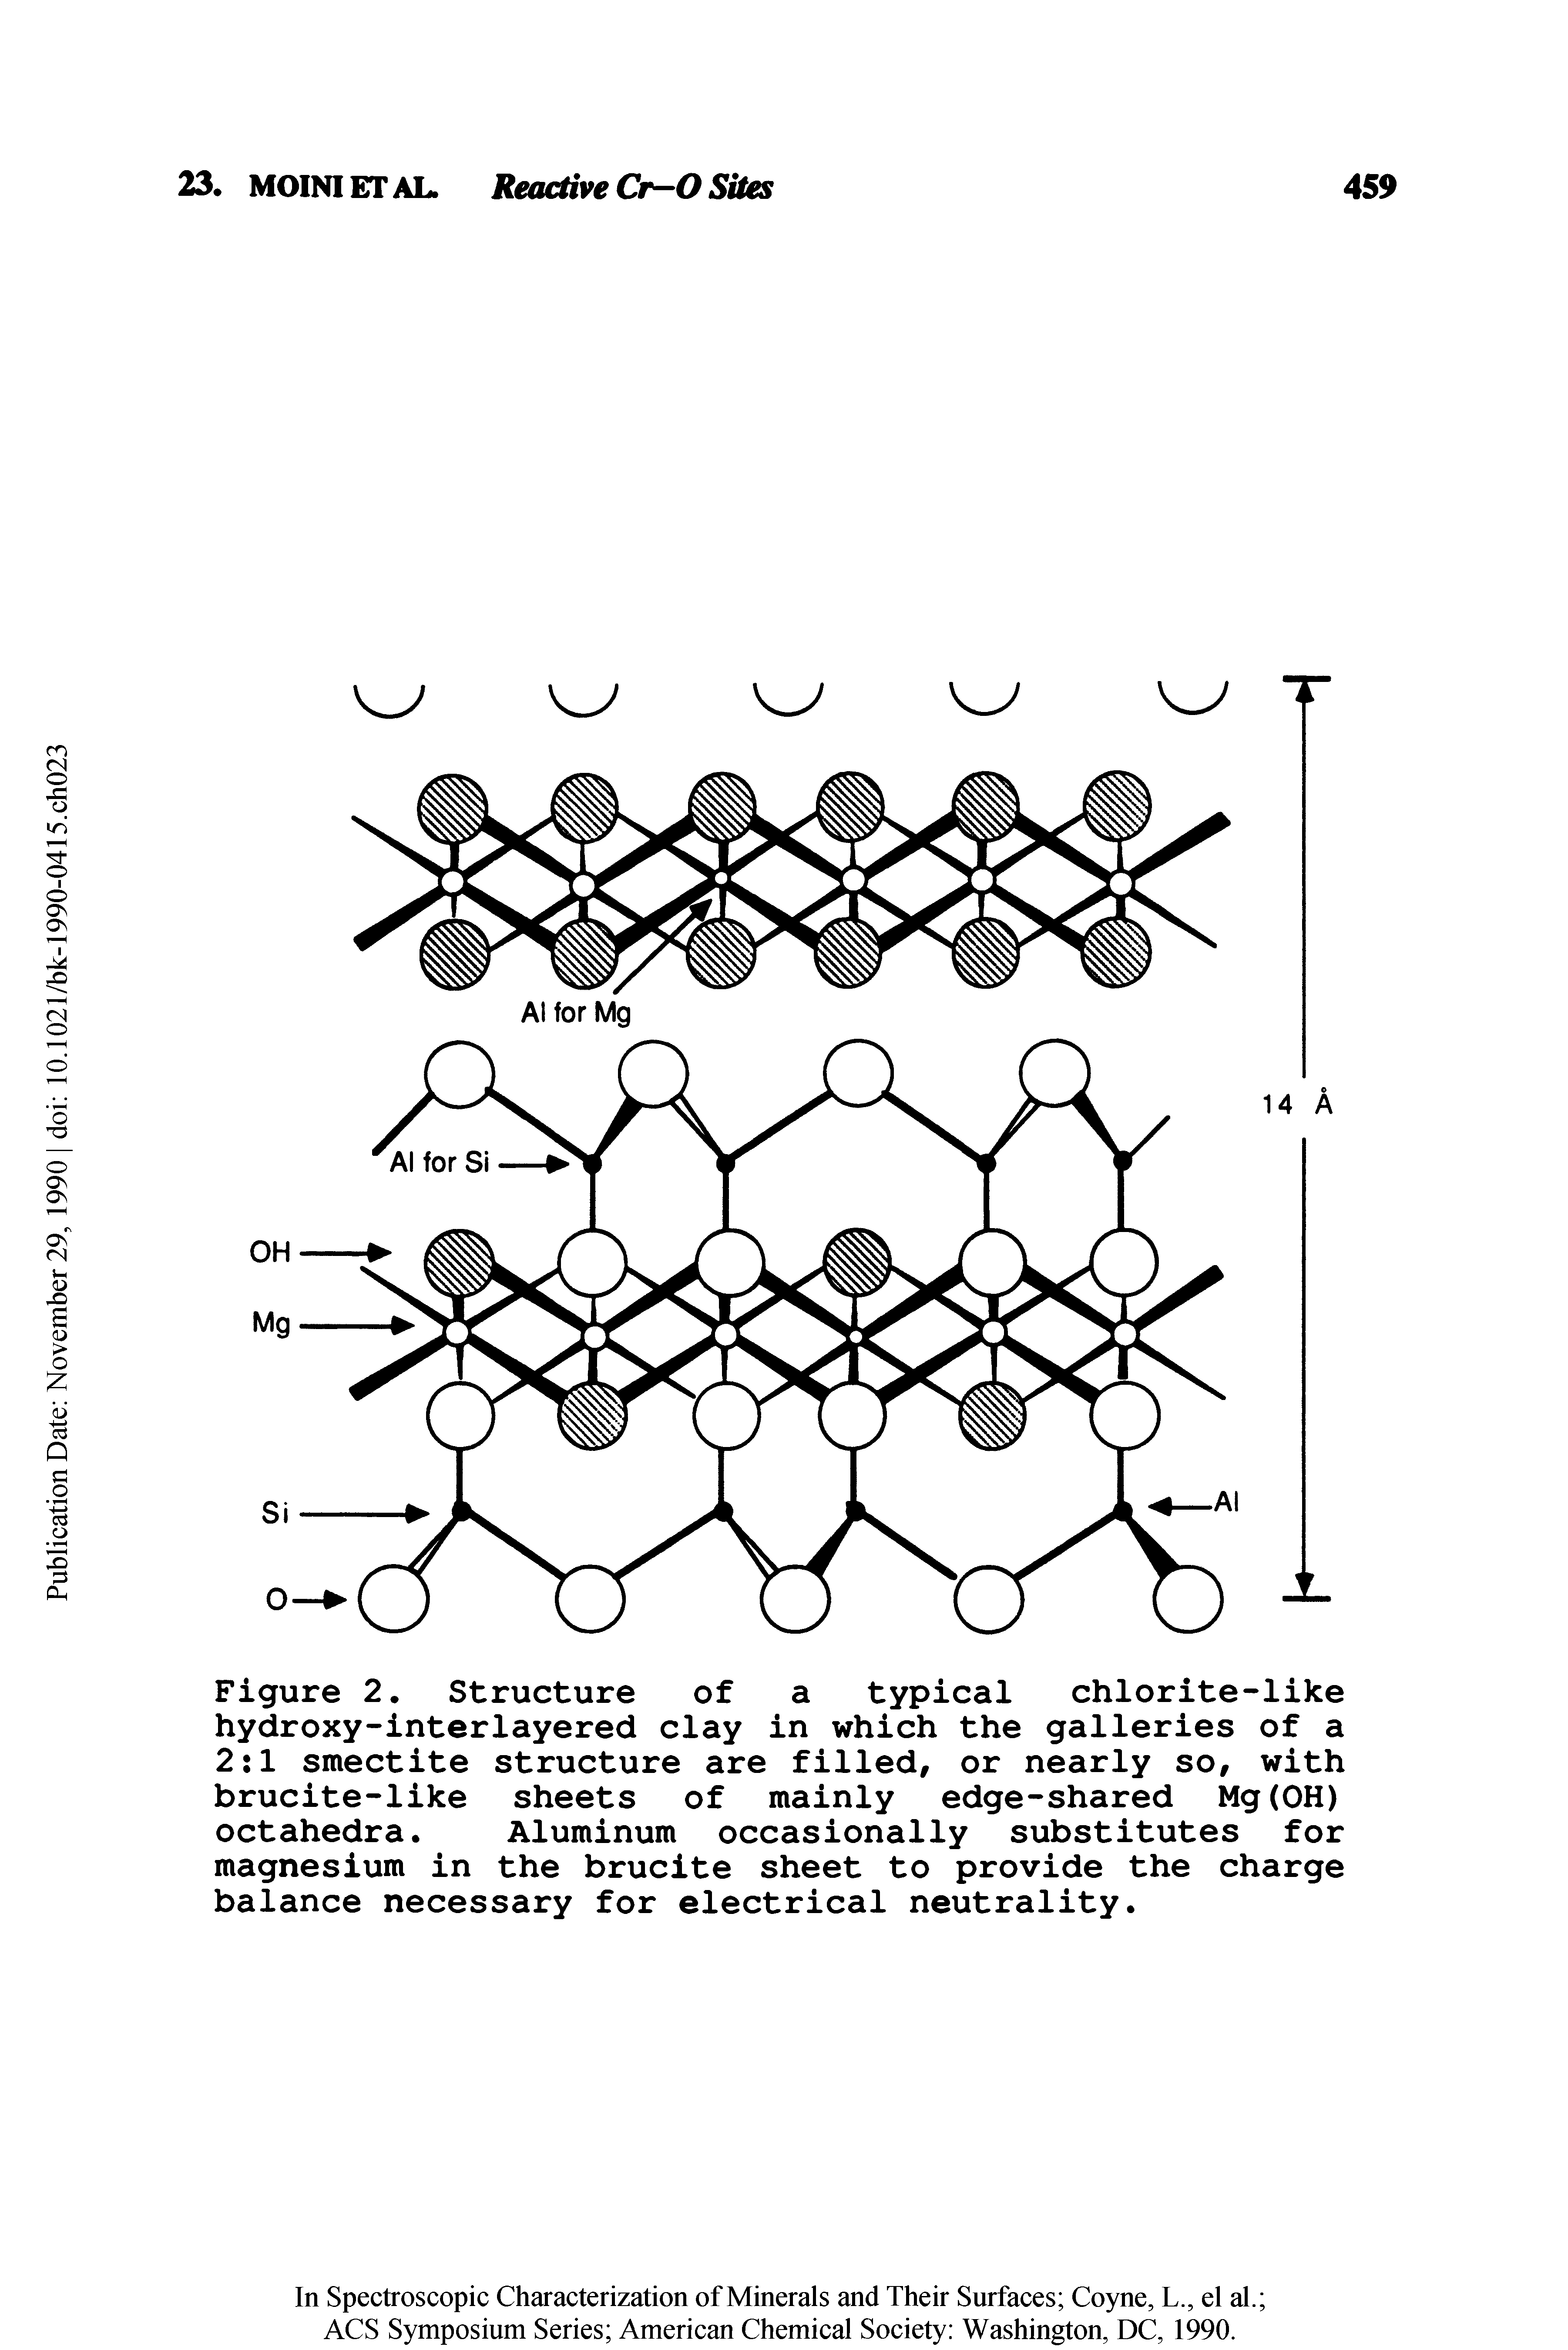 Figure 2. Structure of a typical chlorite-like hydroxy-interlayered clay in which the galleries of a 2 1 smectite structure are filled, or nearly so, with brucite-like sheets of mainly edge-shared Mg(OH) octahedra. Aluminum occasionally substitutes for magnesium in the brucite sheet to provide the charge balance necessary for electrical neutrality.